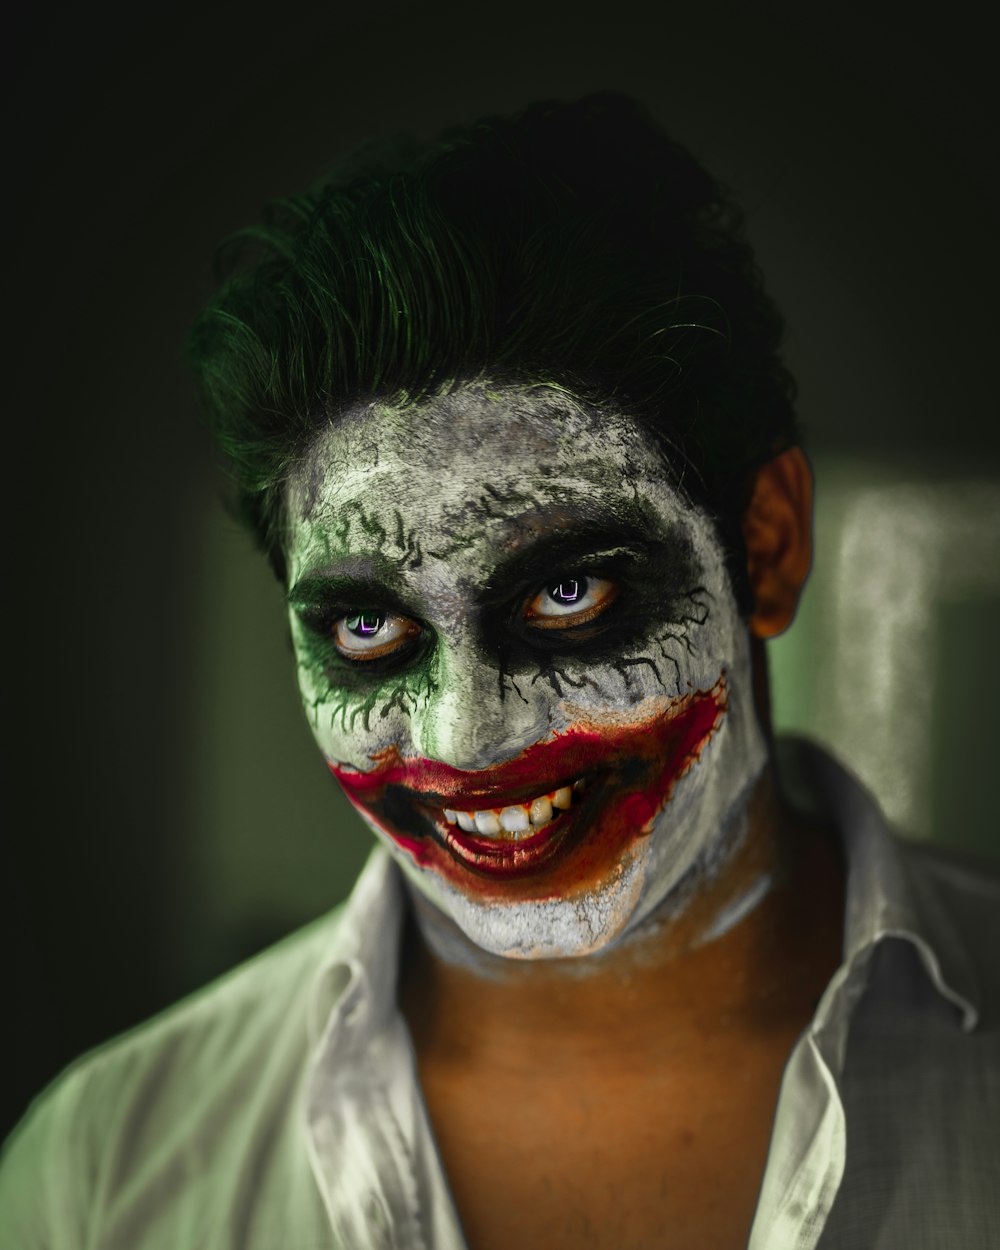 Man in white collared shirt with red and green face paint photo ...